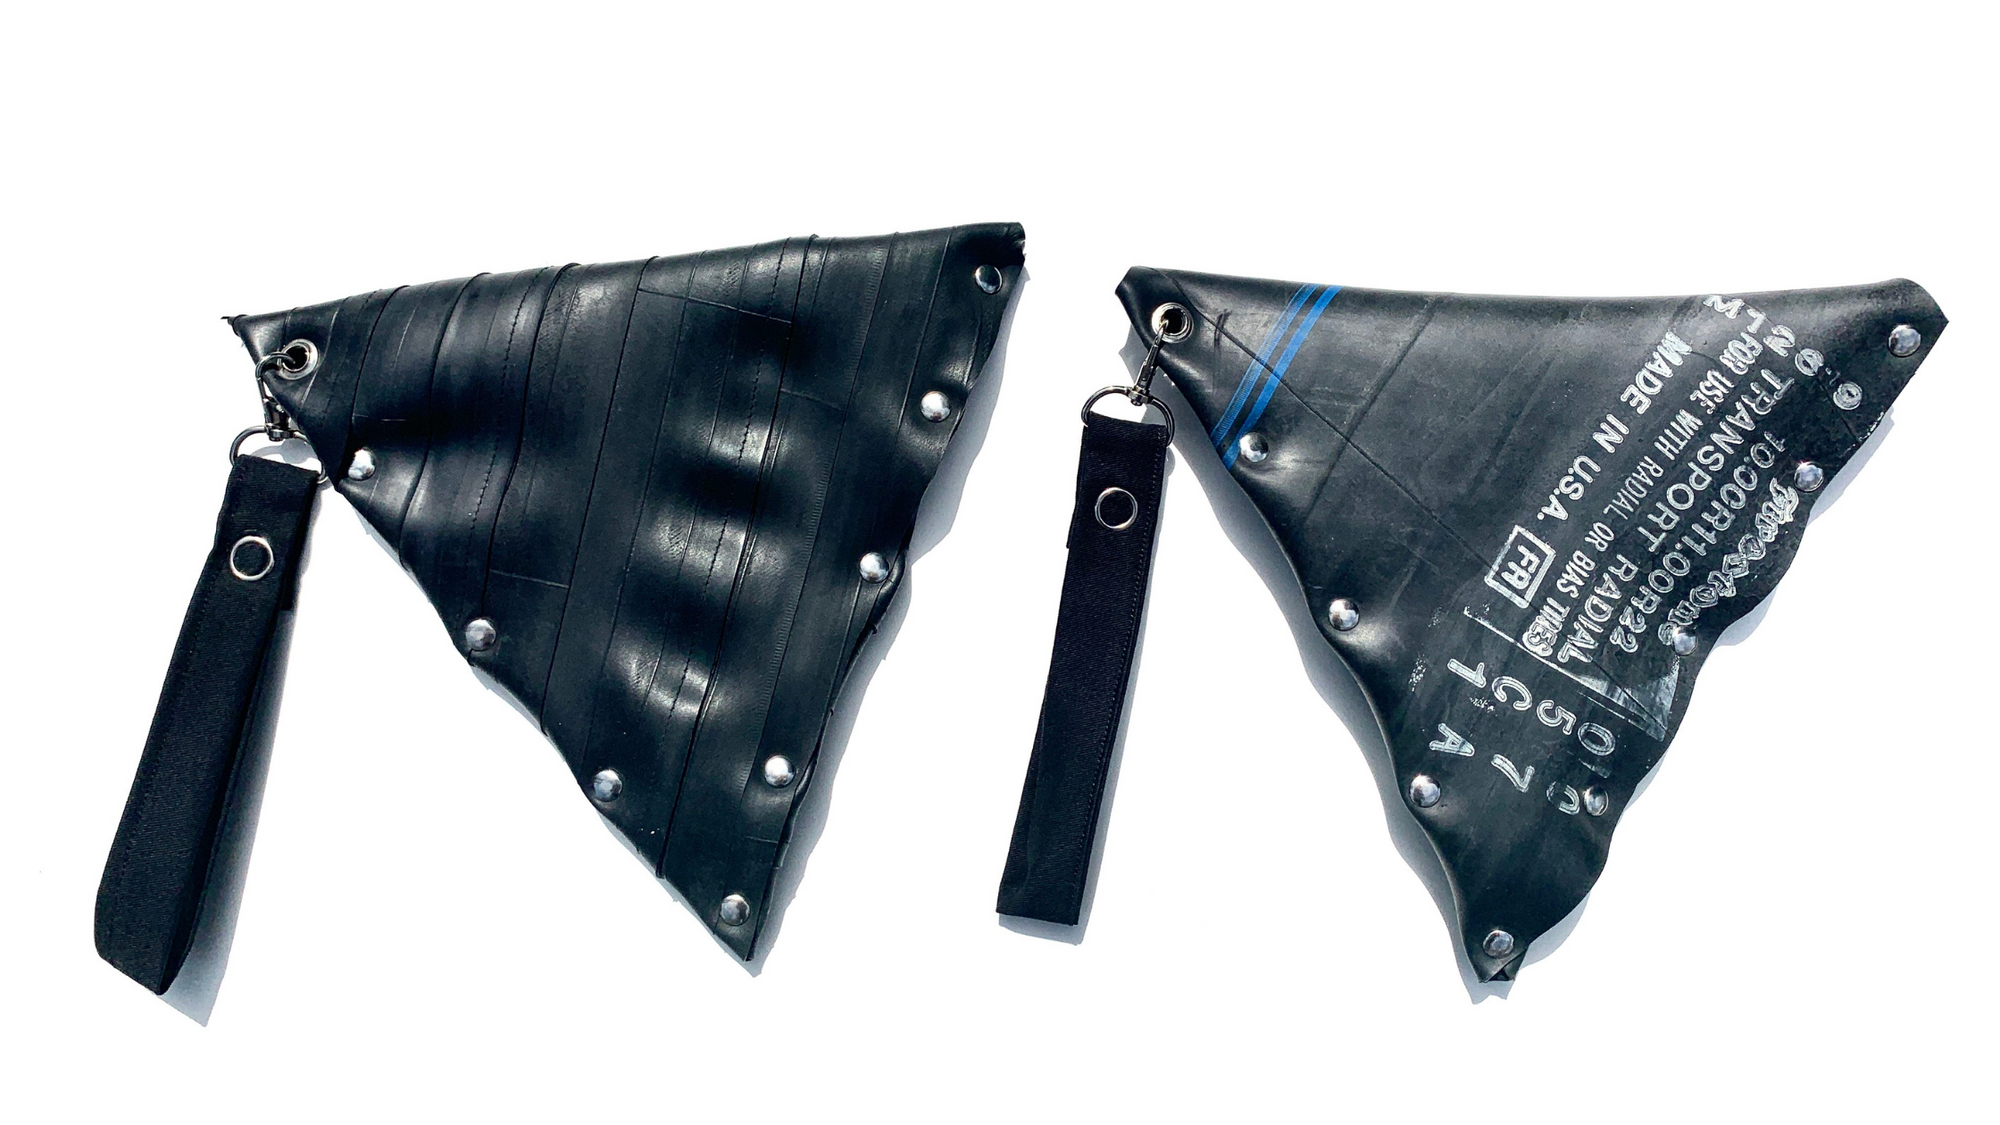 Introducing our first Triangle clutches made from bike tubes